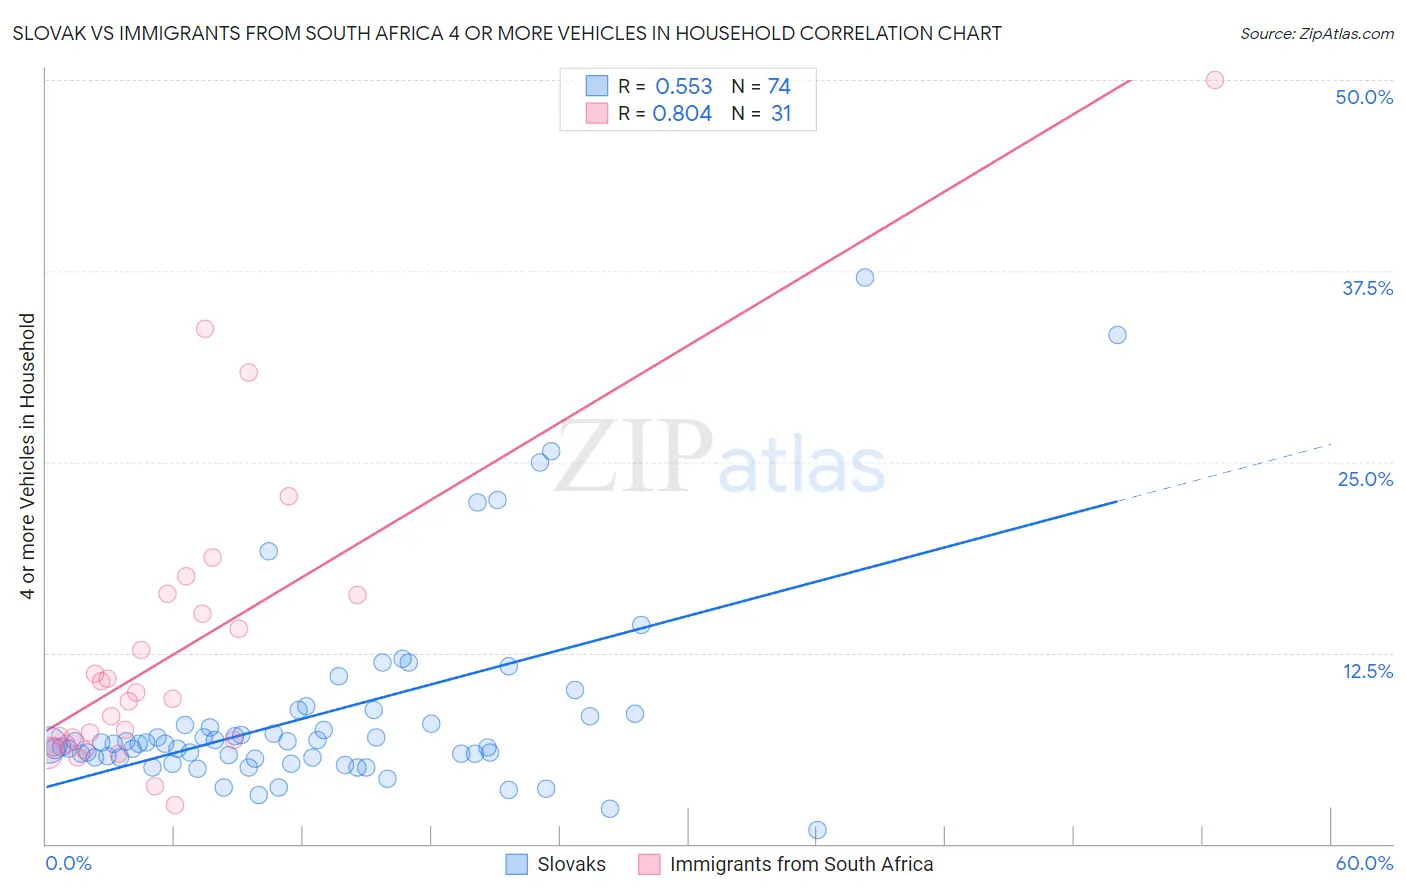 Slovak vs Immigrants from South Africa 4 or more Vehicles in Household